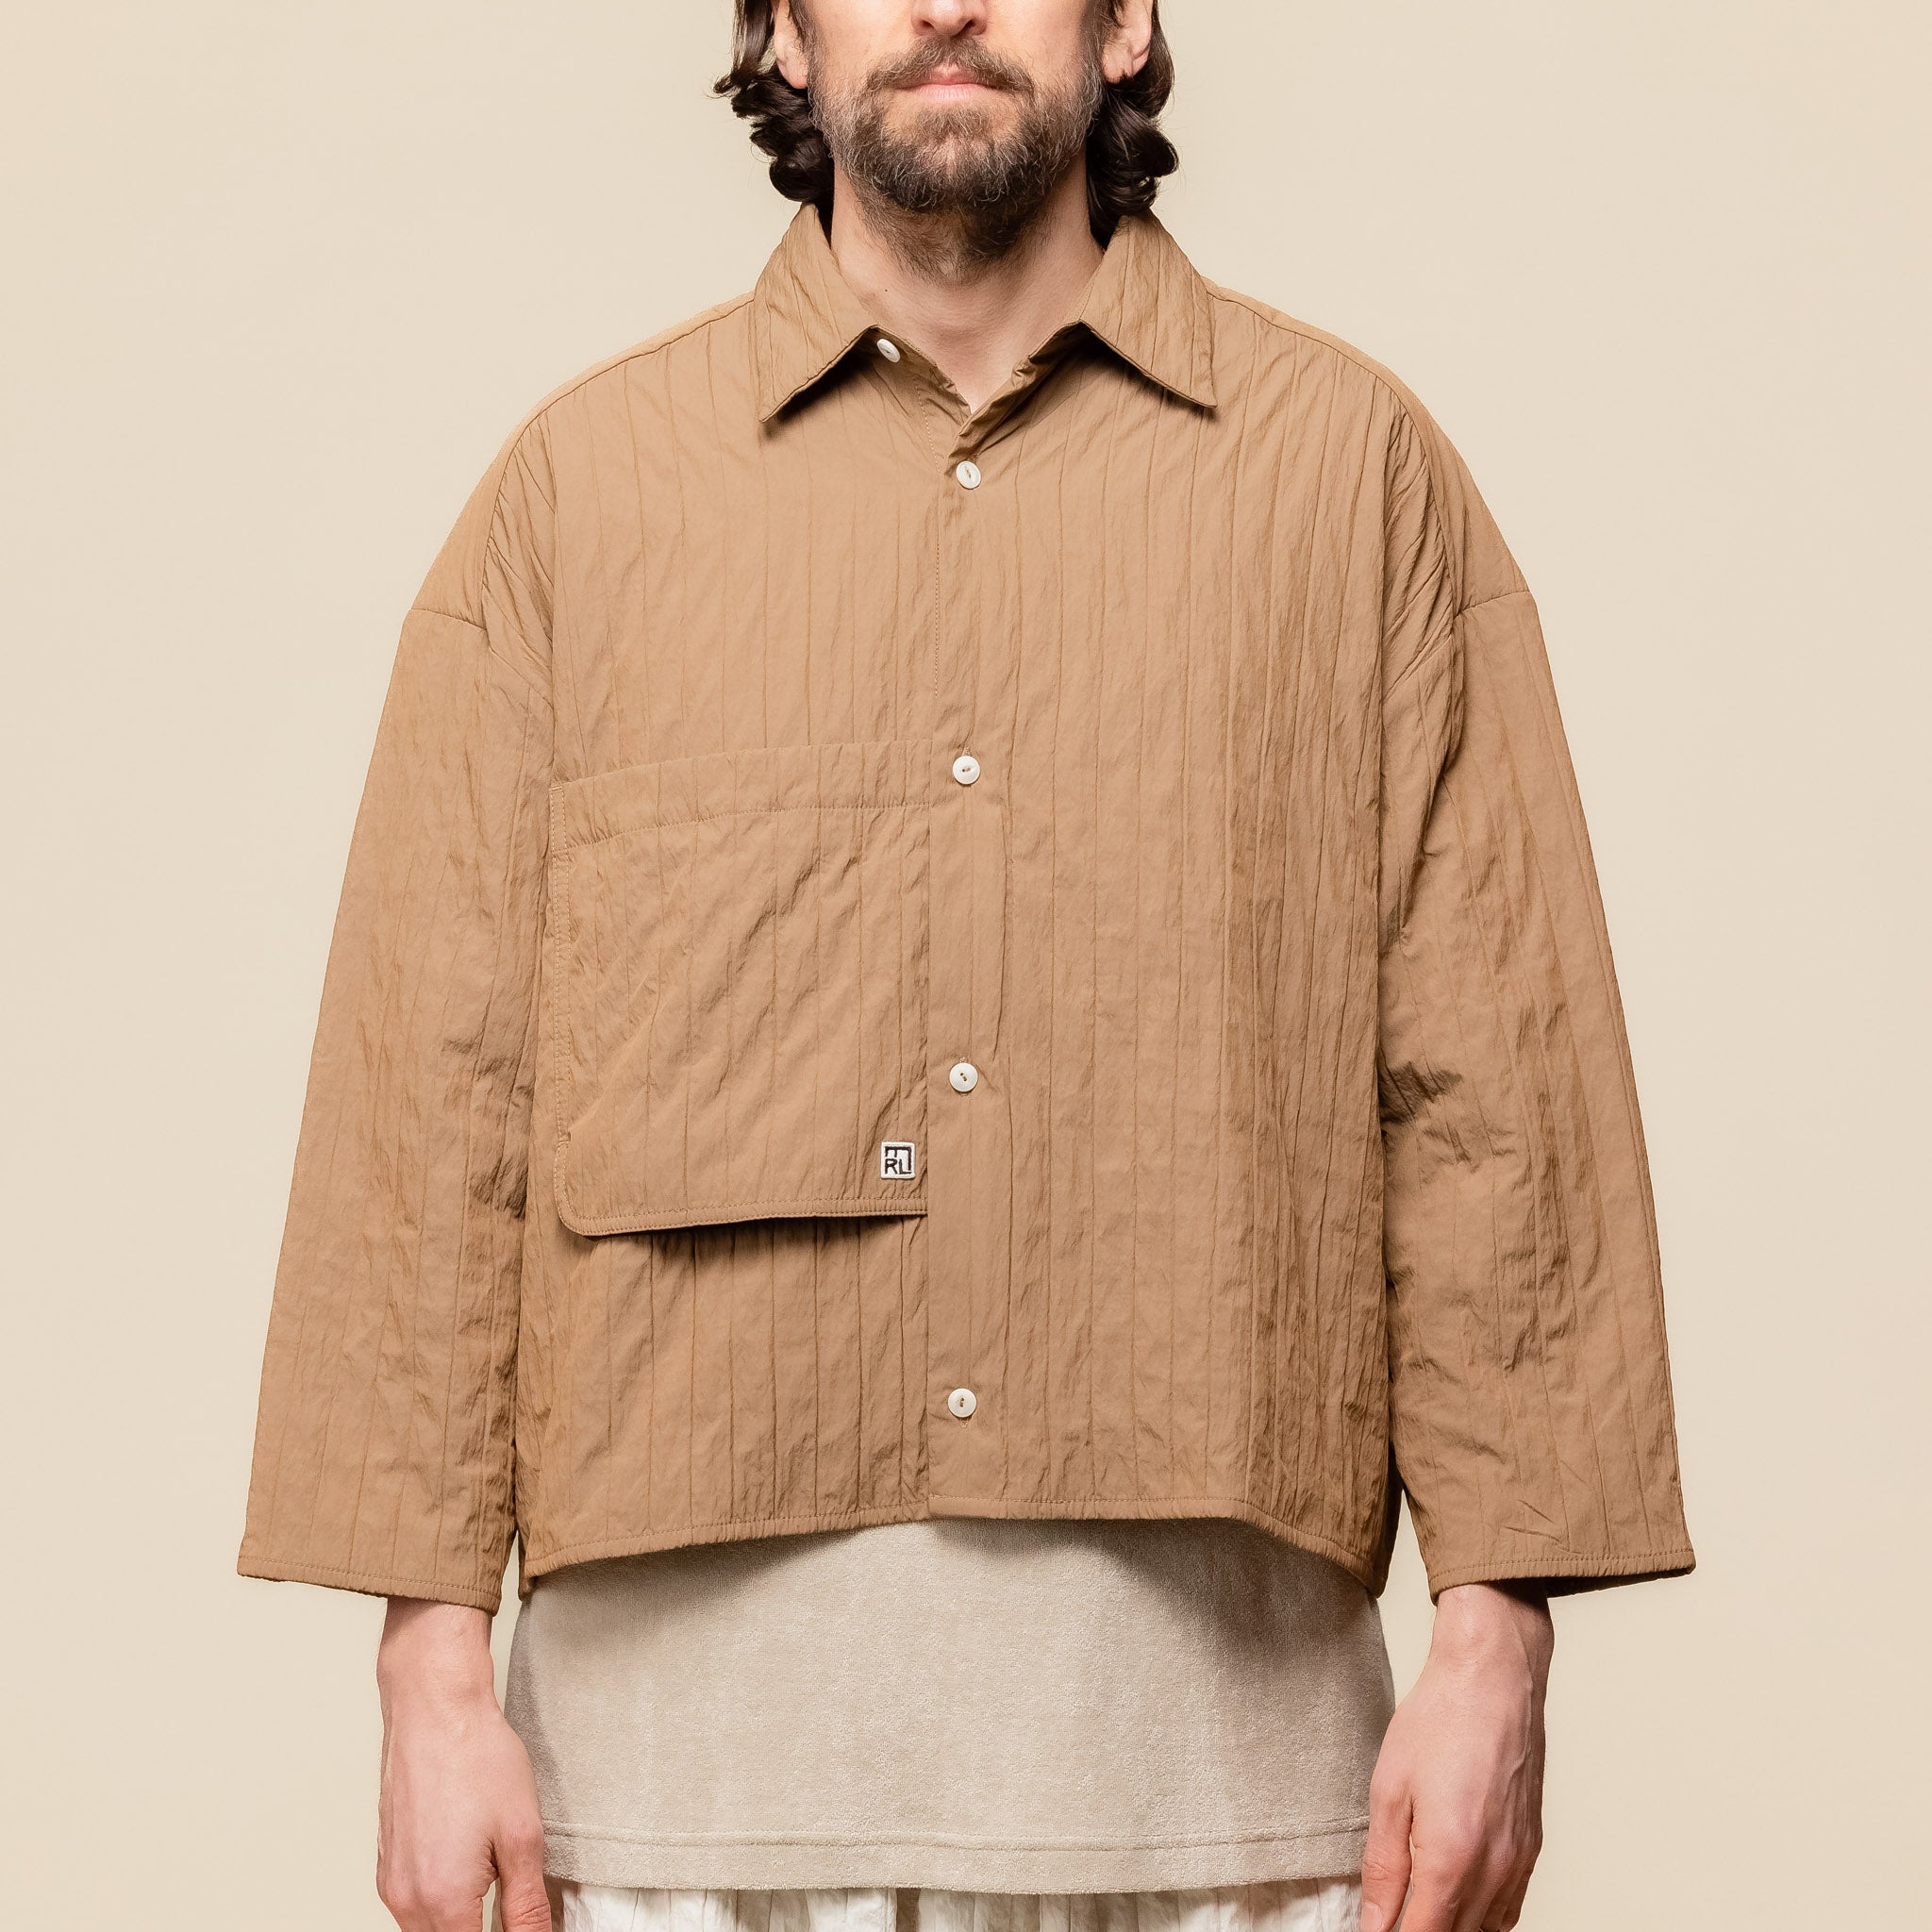 Merely Made - Quilted Cropped Shirt - Sage Brown 24SML231SH "merely made website" "merely made stockist"